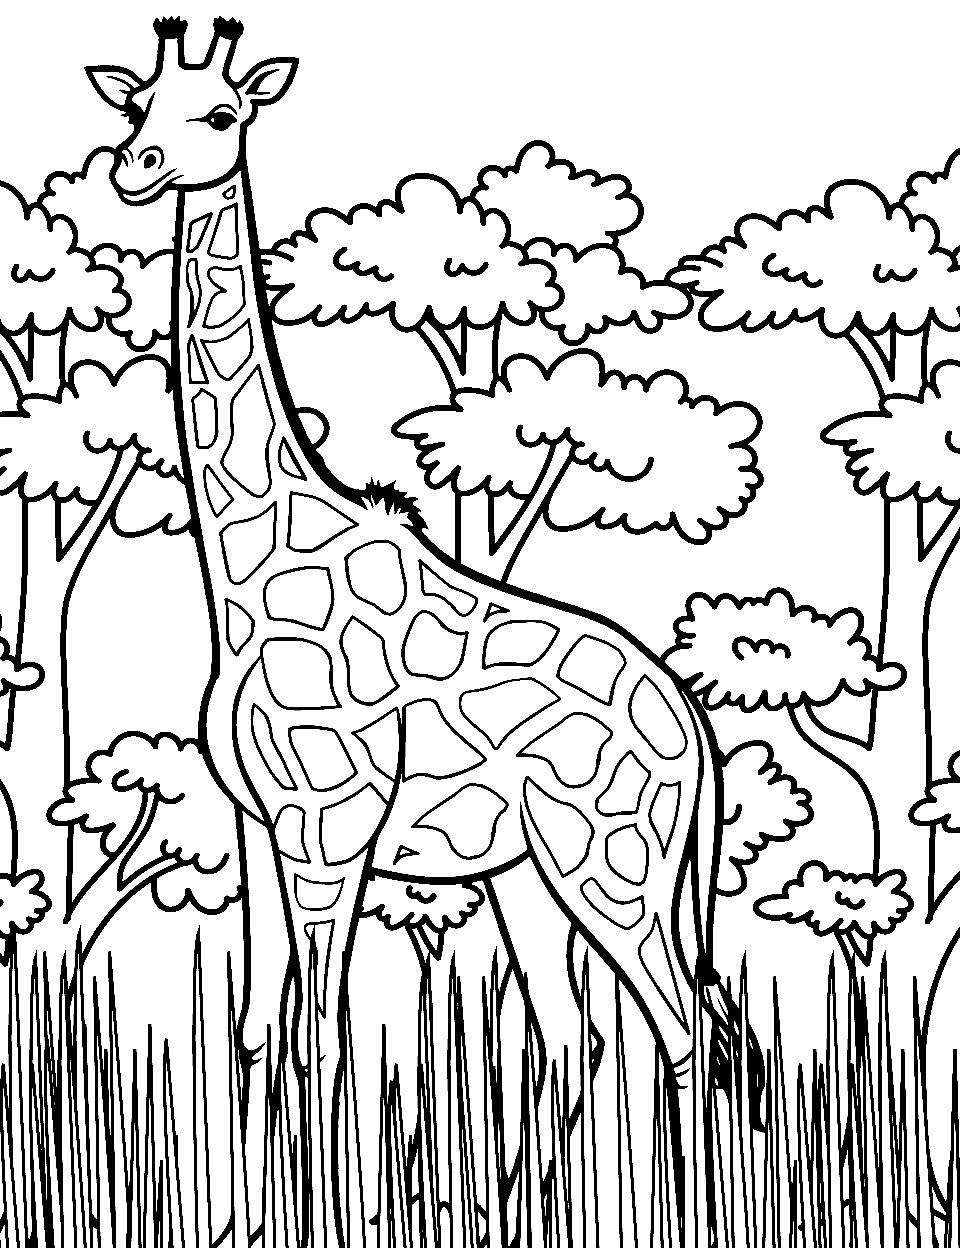 Difficult Giraffe Scene Coloring Page - An intricate scene with a giraffe amidst dense grass and trees.